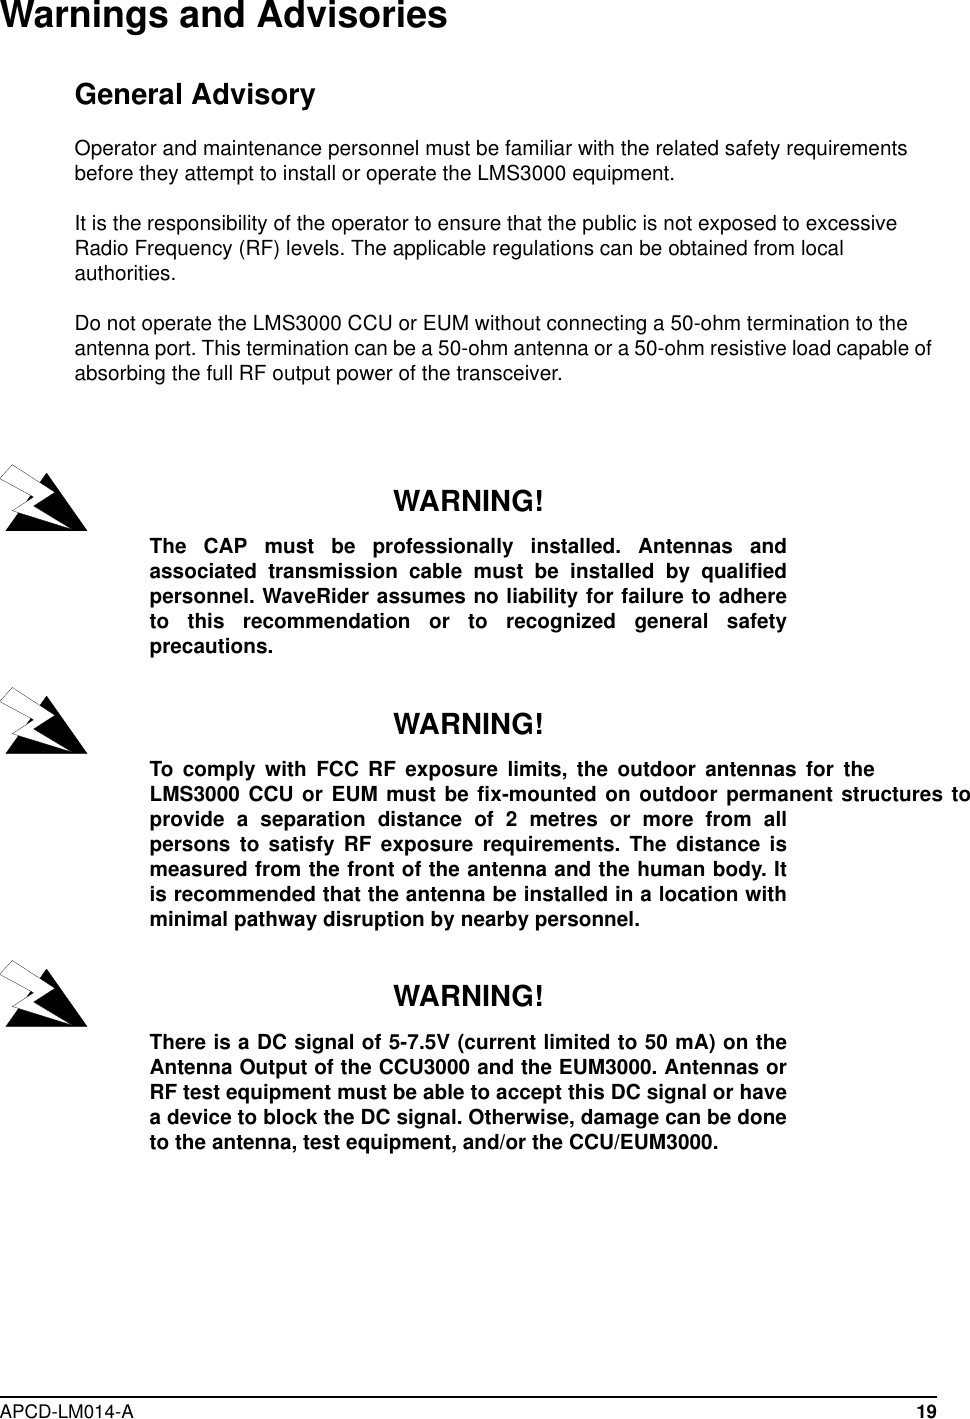  APCD-LM014-A 19Warnings and AdvisoriesGeneral AdvisoryOperator and maintenance personnel must be familiar with the related safety requirements before they attempt to install or operate the LMS3000 equipment.It is the responsibility of the operator to ensure that the public is not exposed to excessive Radio Frequency (RF) levels. The applicable regulations can be obtained from local authorities. Do not operate the LMS3000 CCU or EUM without connecting a 50-ohm termination to the antenna port. This termination can be a 50-ohm antenna or a 50-ohm resistive load capable of absorbing the full RF output power of the transceiver.WARNING!The CAP must be professionally installed. Antennas andassociated transmission cable must be installed by qualifiedpersonnel. WaveRider assumes no liability for failure to adhereto this recommendation or to recognized general safetyprecautions.WARNING!To comply with FCC RF exposure limits, the outdoor antennas for theLMS3000 CCU or EUM must be fix-mounted on outdoor permanent structures toprovide a separation distance of 2 metres or more from allpersons to satisfy RF exposure requirements. The distance ismeasured from the front of the antenna and the human body. Itis recommended that the antenna be installed in a location withminimal pathway disruption by nearby personnel.WARNING!There is a DC signal of 5-7.5V (current limited to 50 mA) on theAntenna Output of the CCU3000 and the EUM3000. Antennas orRF test equipment must be able to accept this DC signal or havea device to block the DC signal. Otherwise, damage can be doneto the antenna, test equipment, and/or the CCU/EUM3000. 